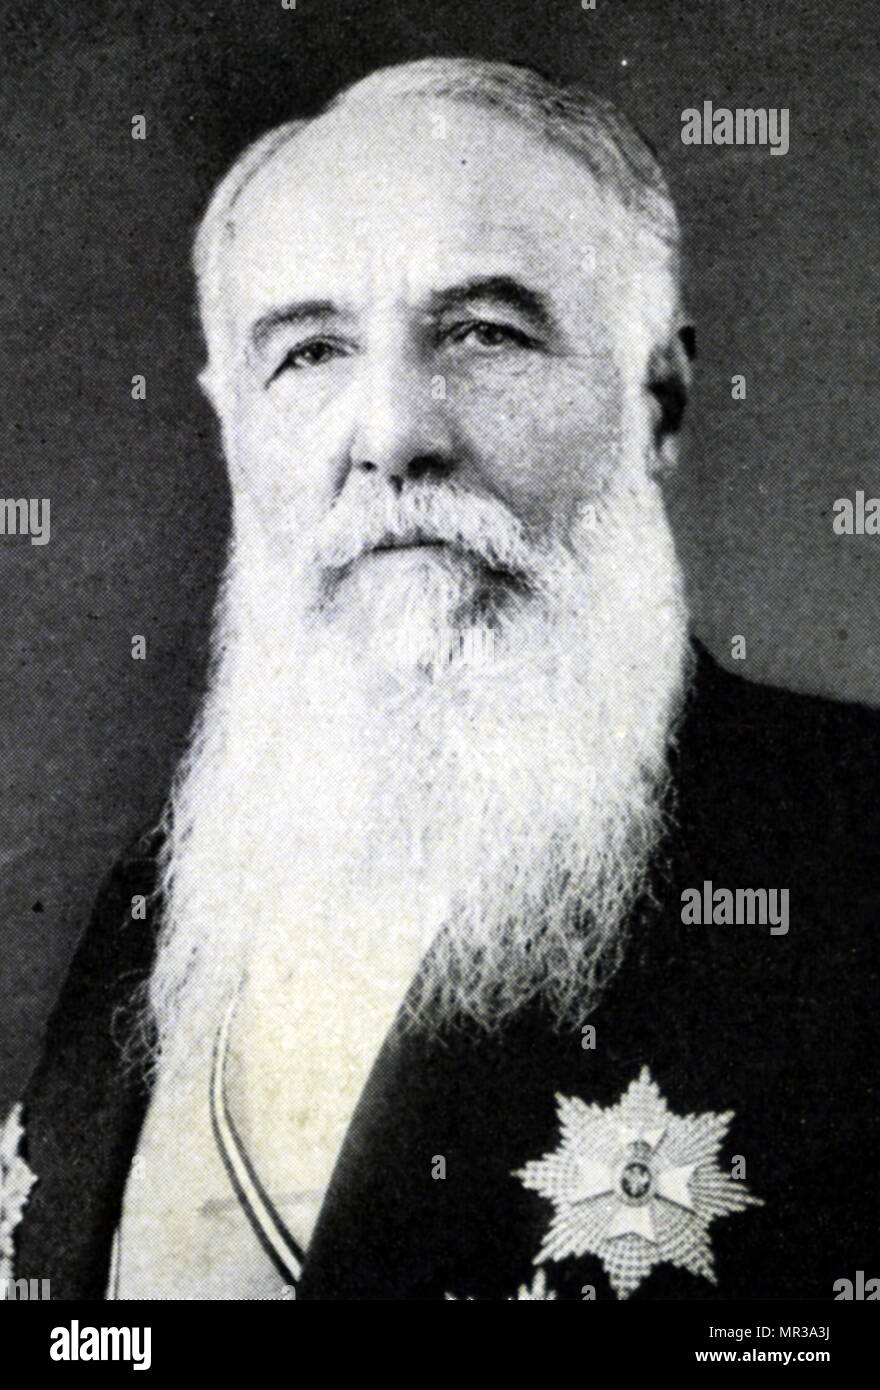 Photographic portrait of Nikola Pašić (1845-1926) a Serbian and Yugoslav politician, diplomat and leader of the People's Radical Party. Dated 20th century Stock Photo